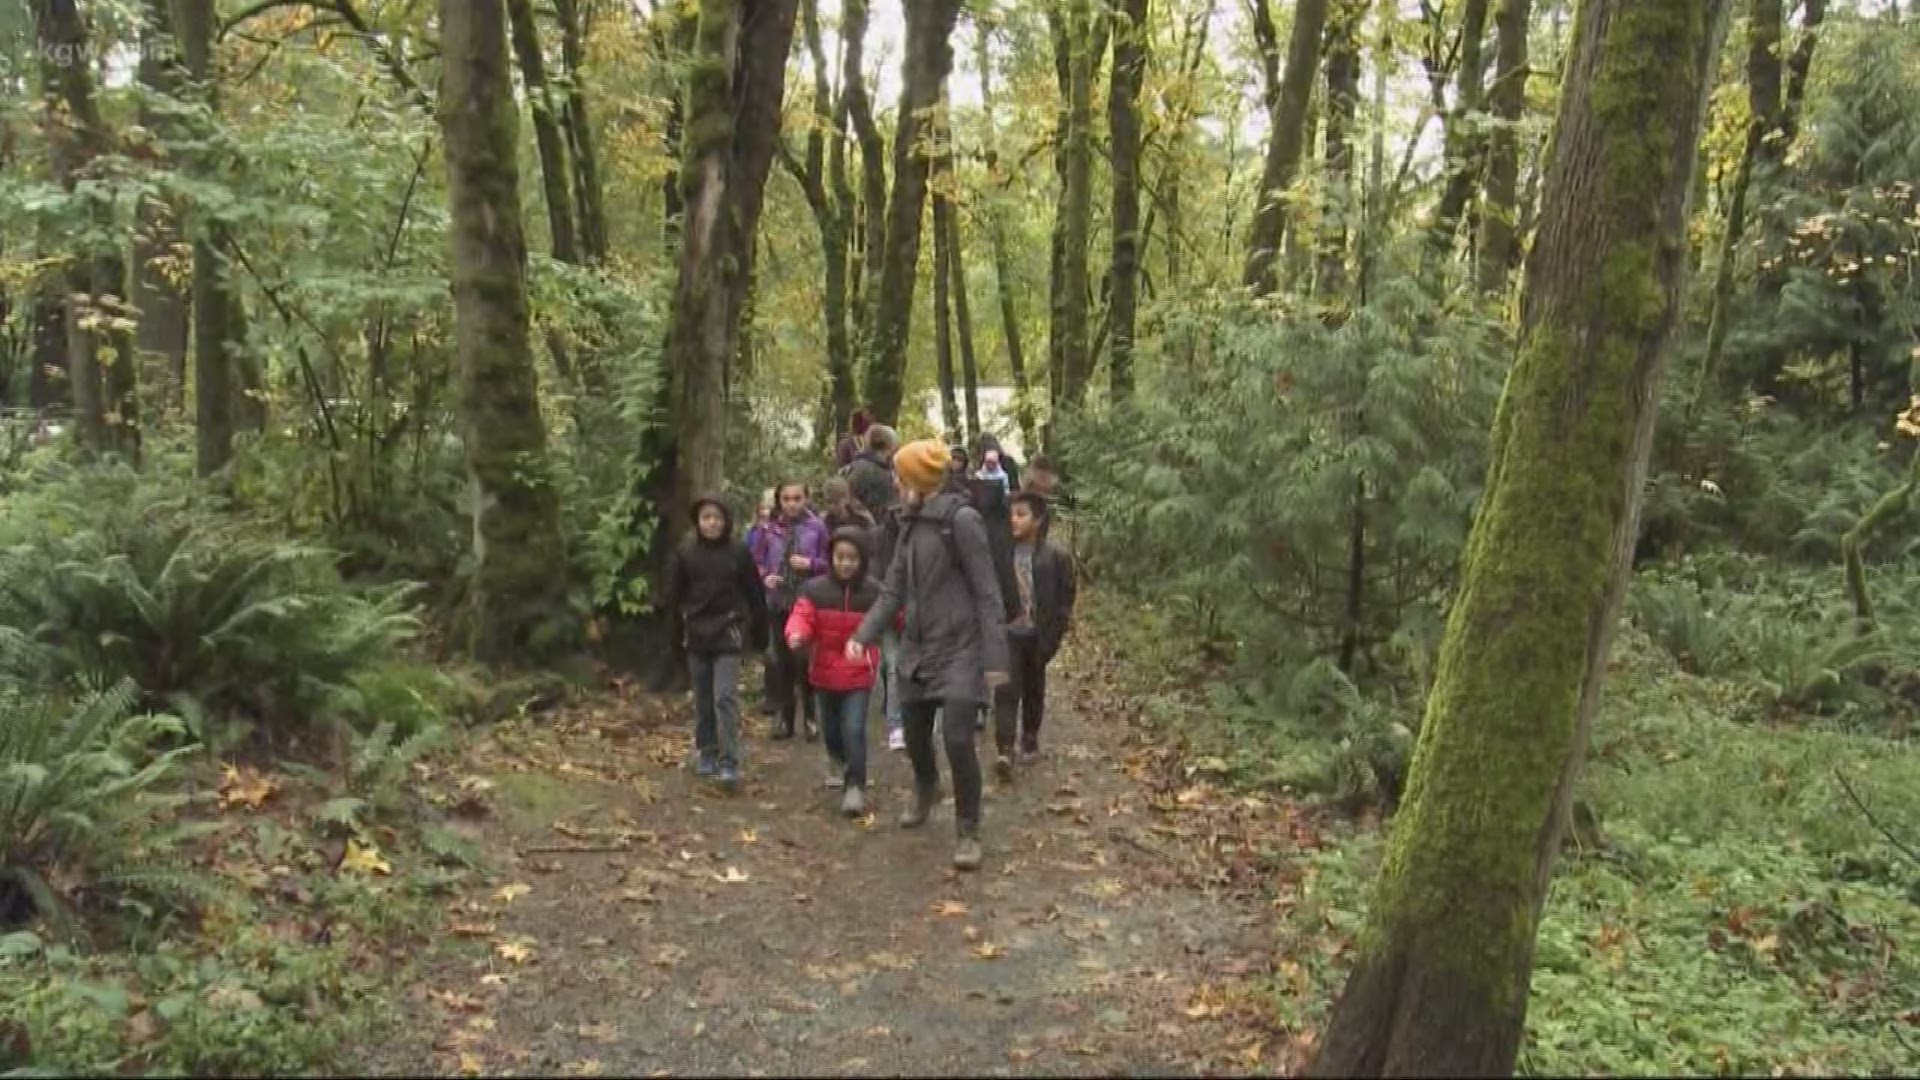 26 fifth-grade students from Southeast Portland’s Marysville Elementary School gathered for science class along the Maple Ridge Trail.